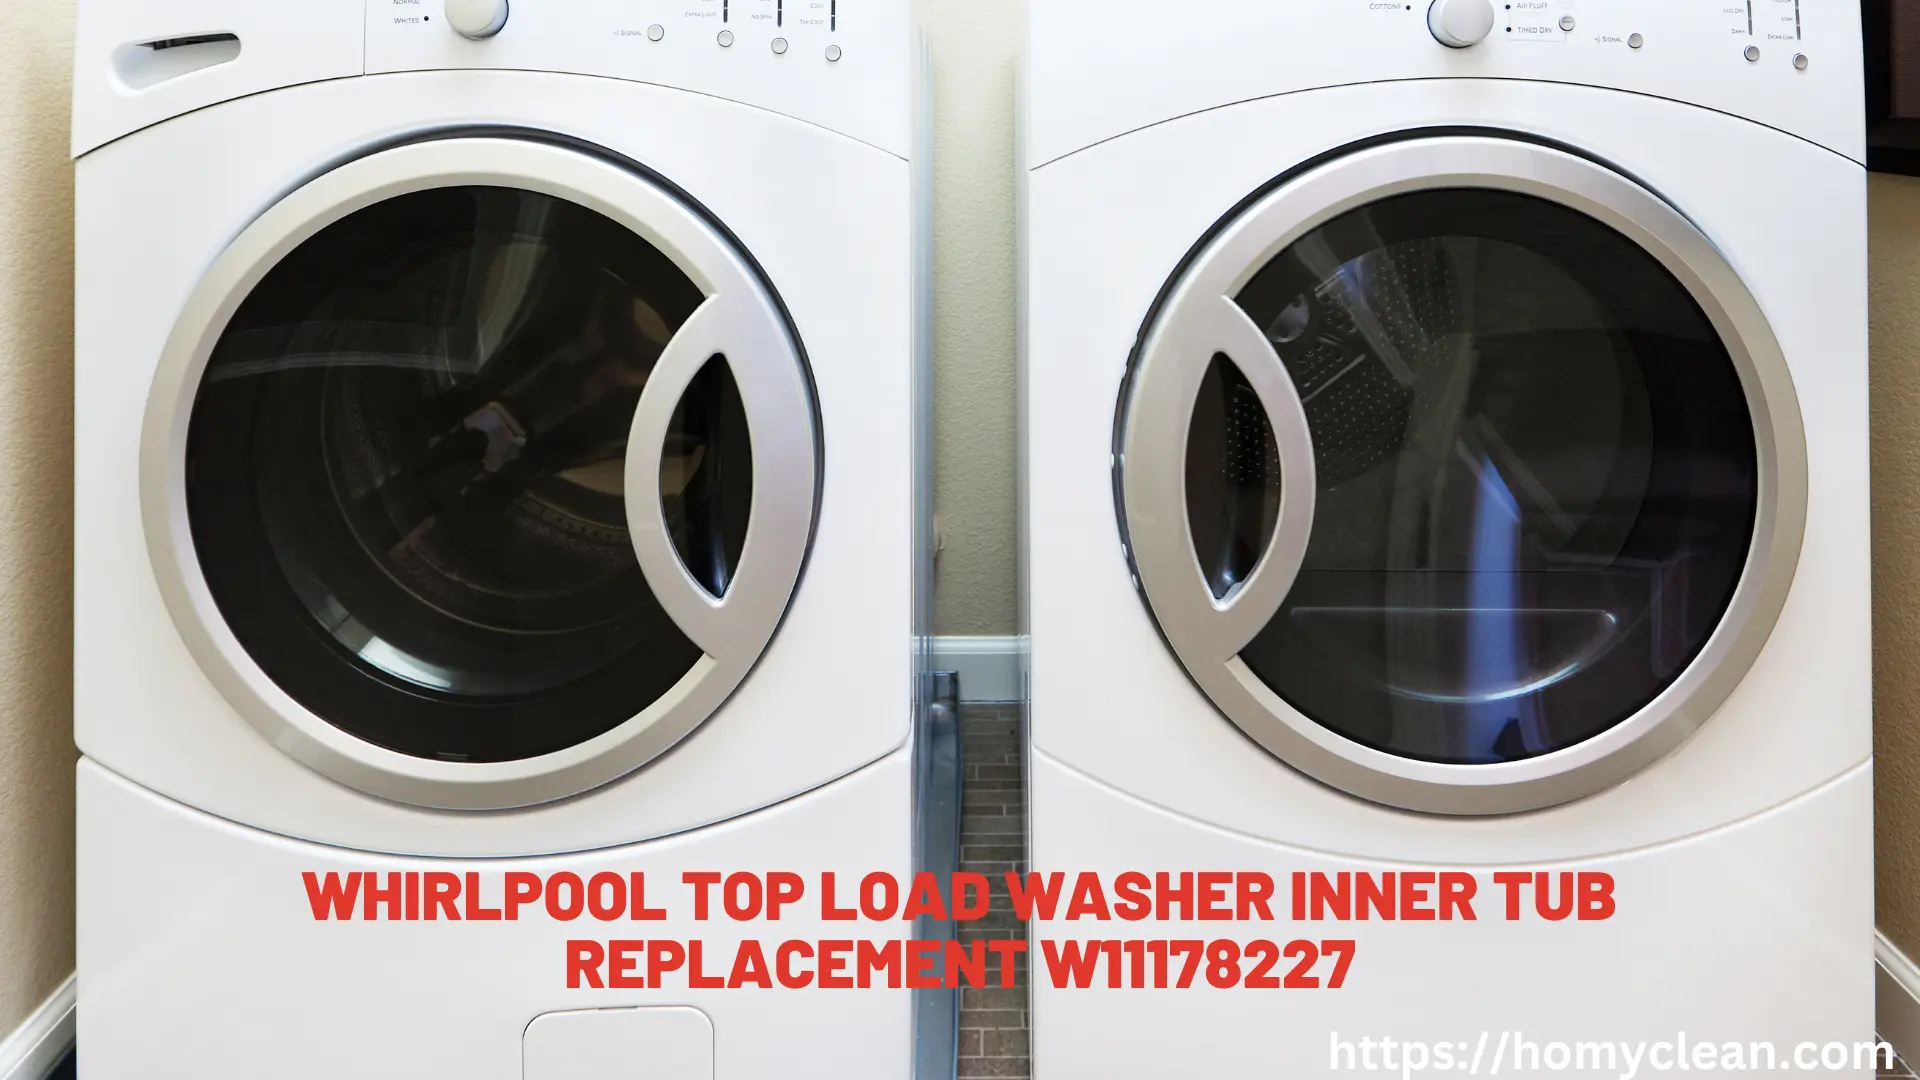 Whirlpool Top Load Washer Inner Tub Replacement W11178227 – A Step-by-Step Guide